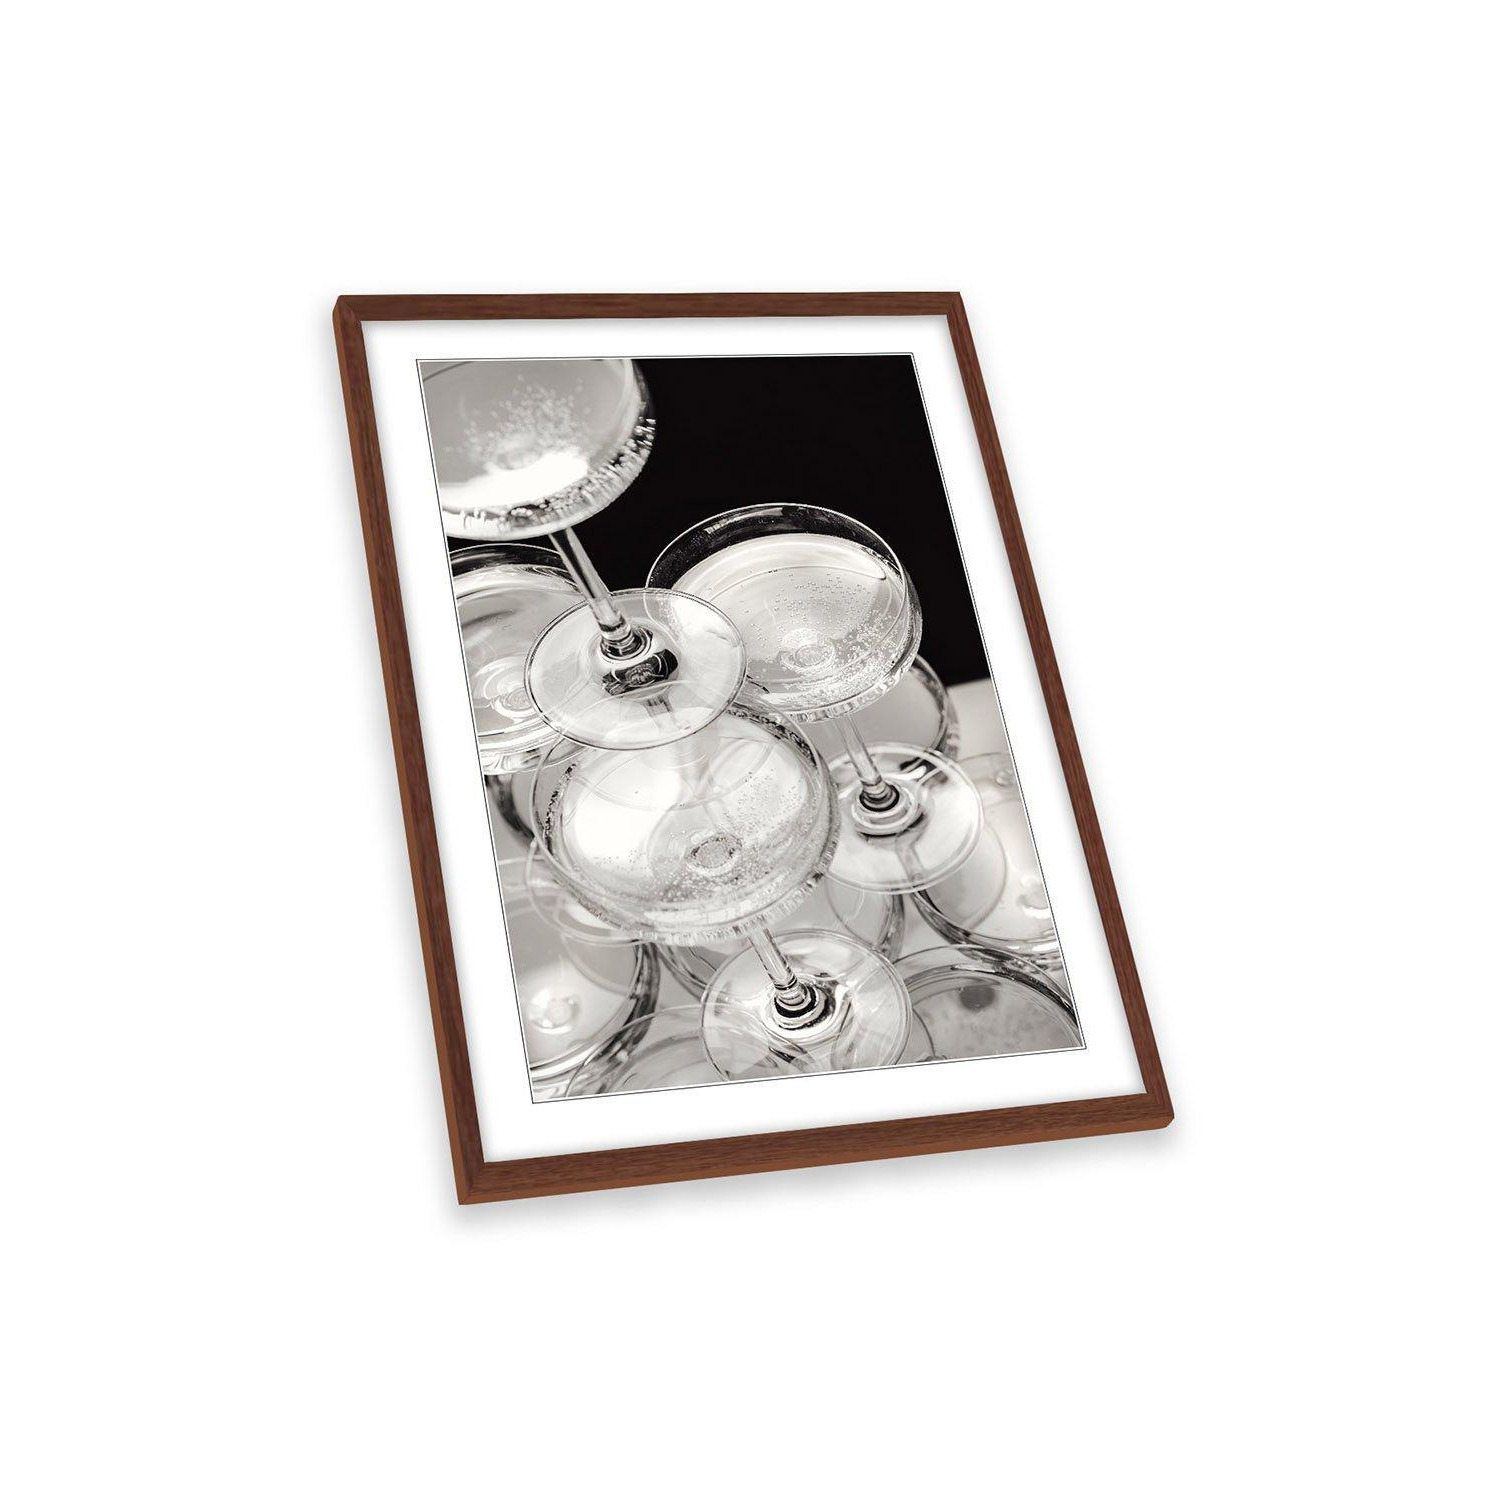 Champagne Tower Black and Grey Kitchen Framed Art Print Picture Wall Artwork - (W)35cm x (H)47cm - image 1